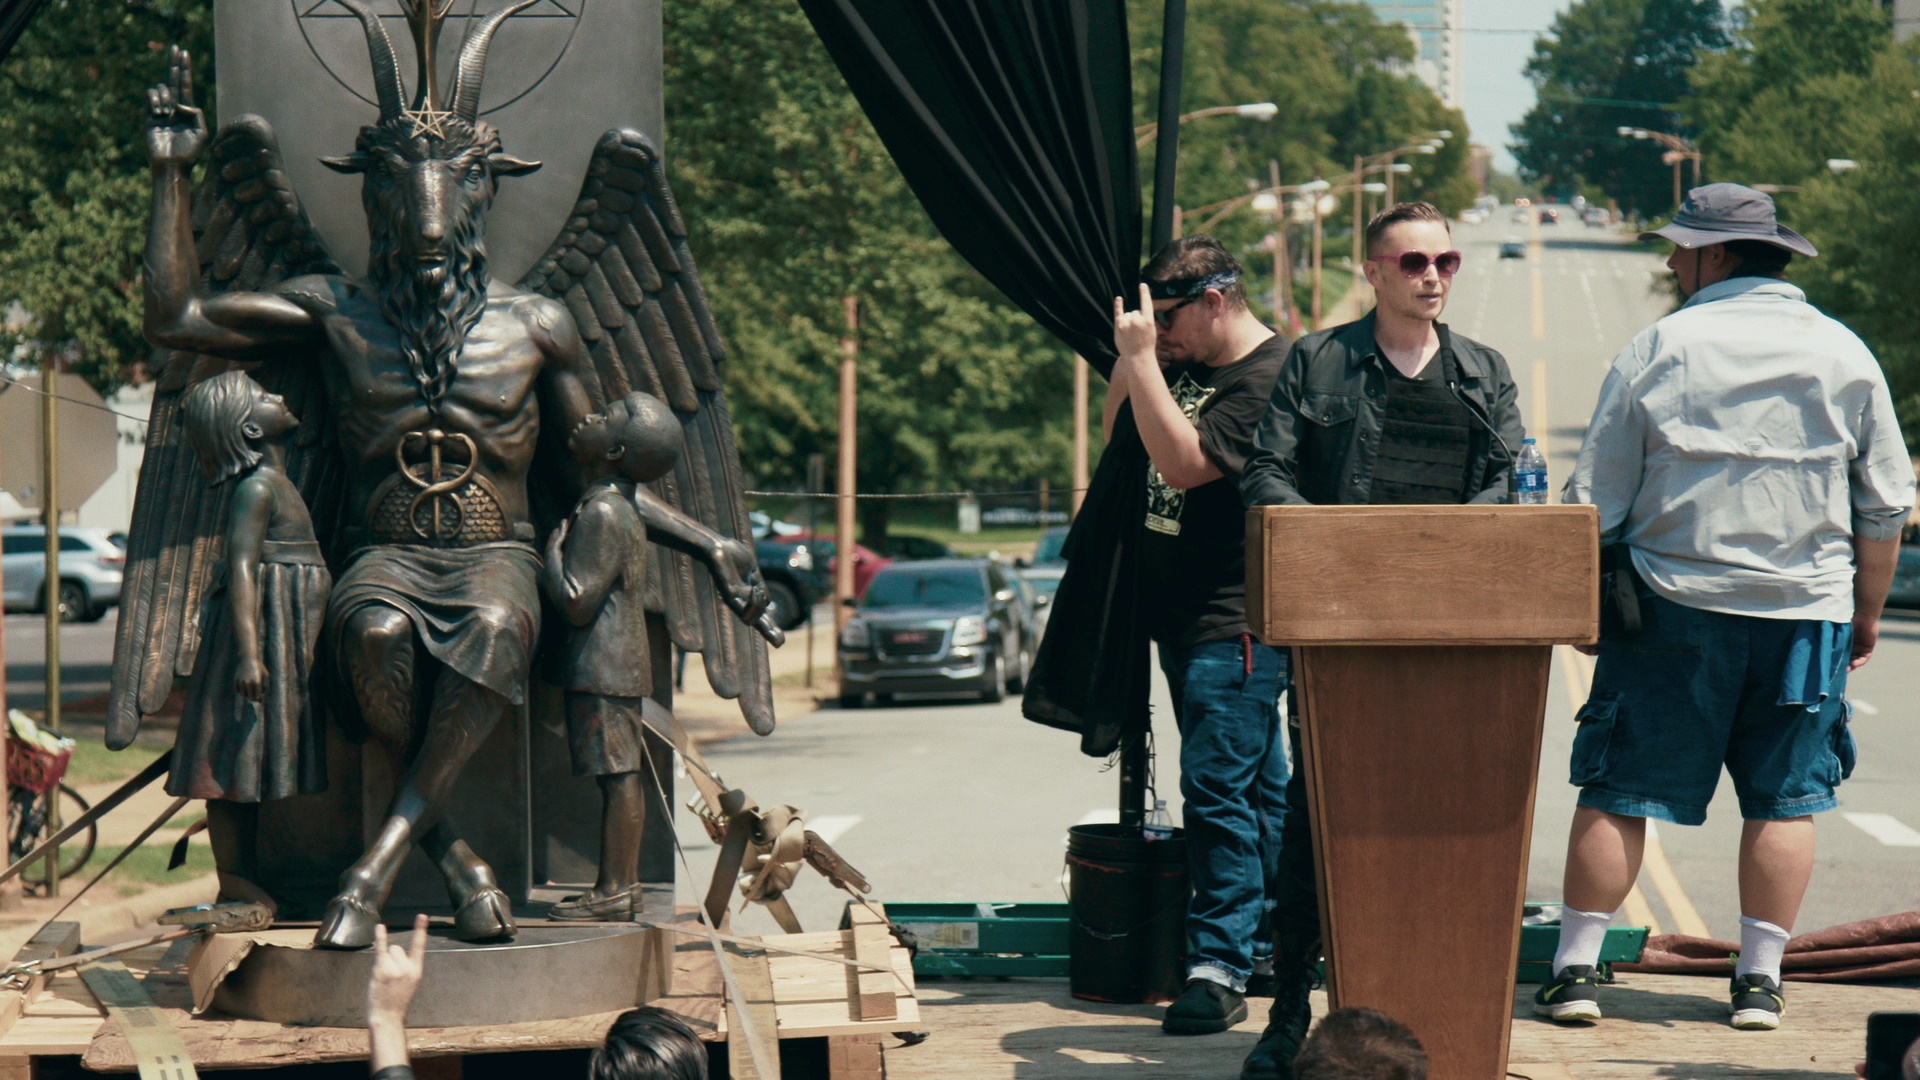 Satanic Temple says Texas abortion law violates the religious freedom of its members